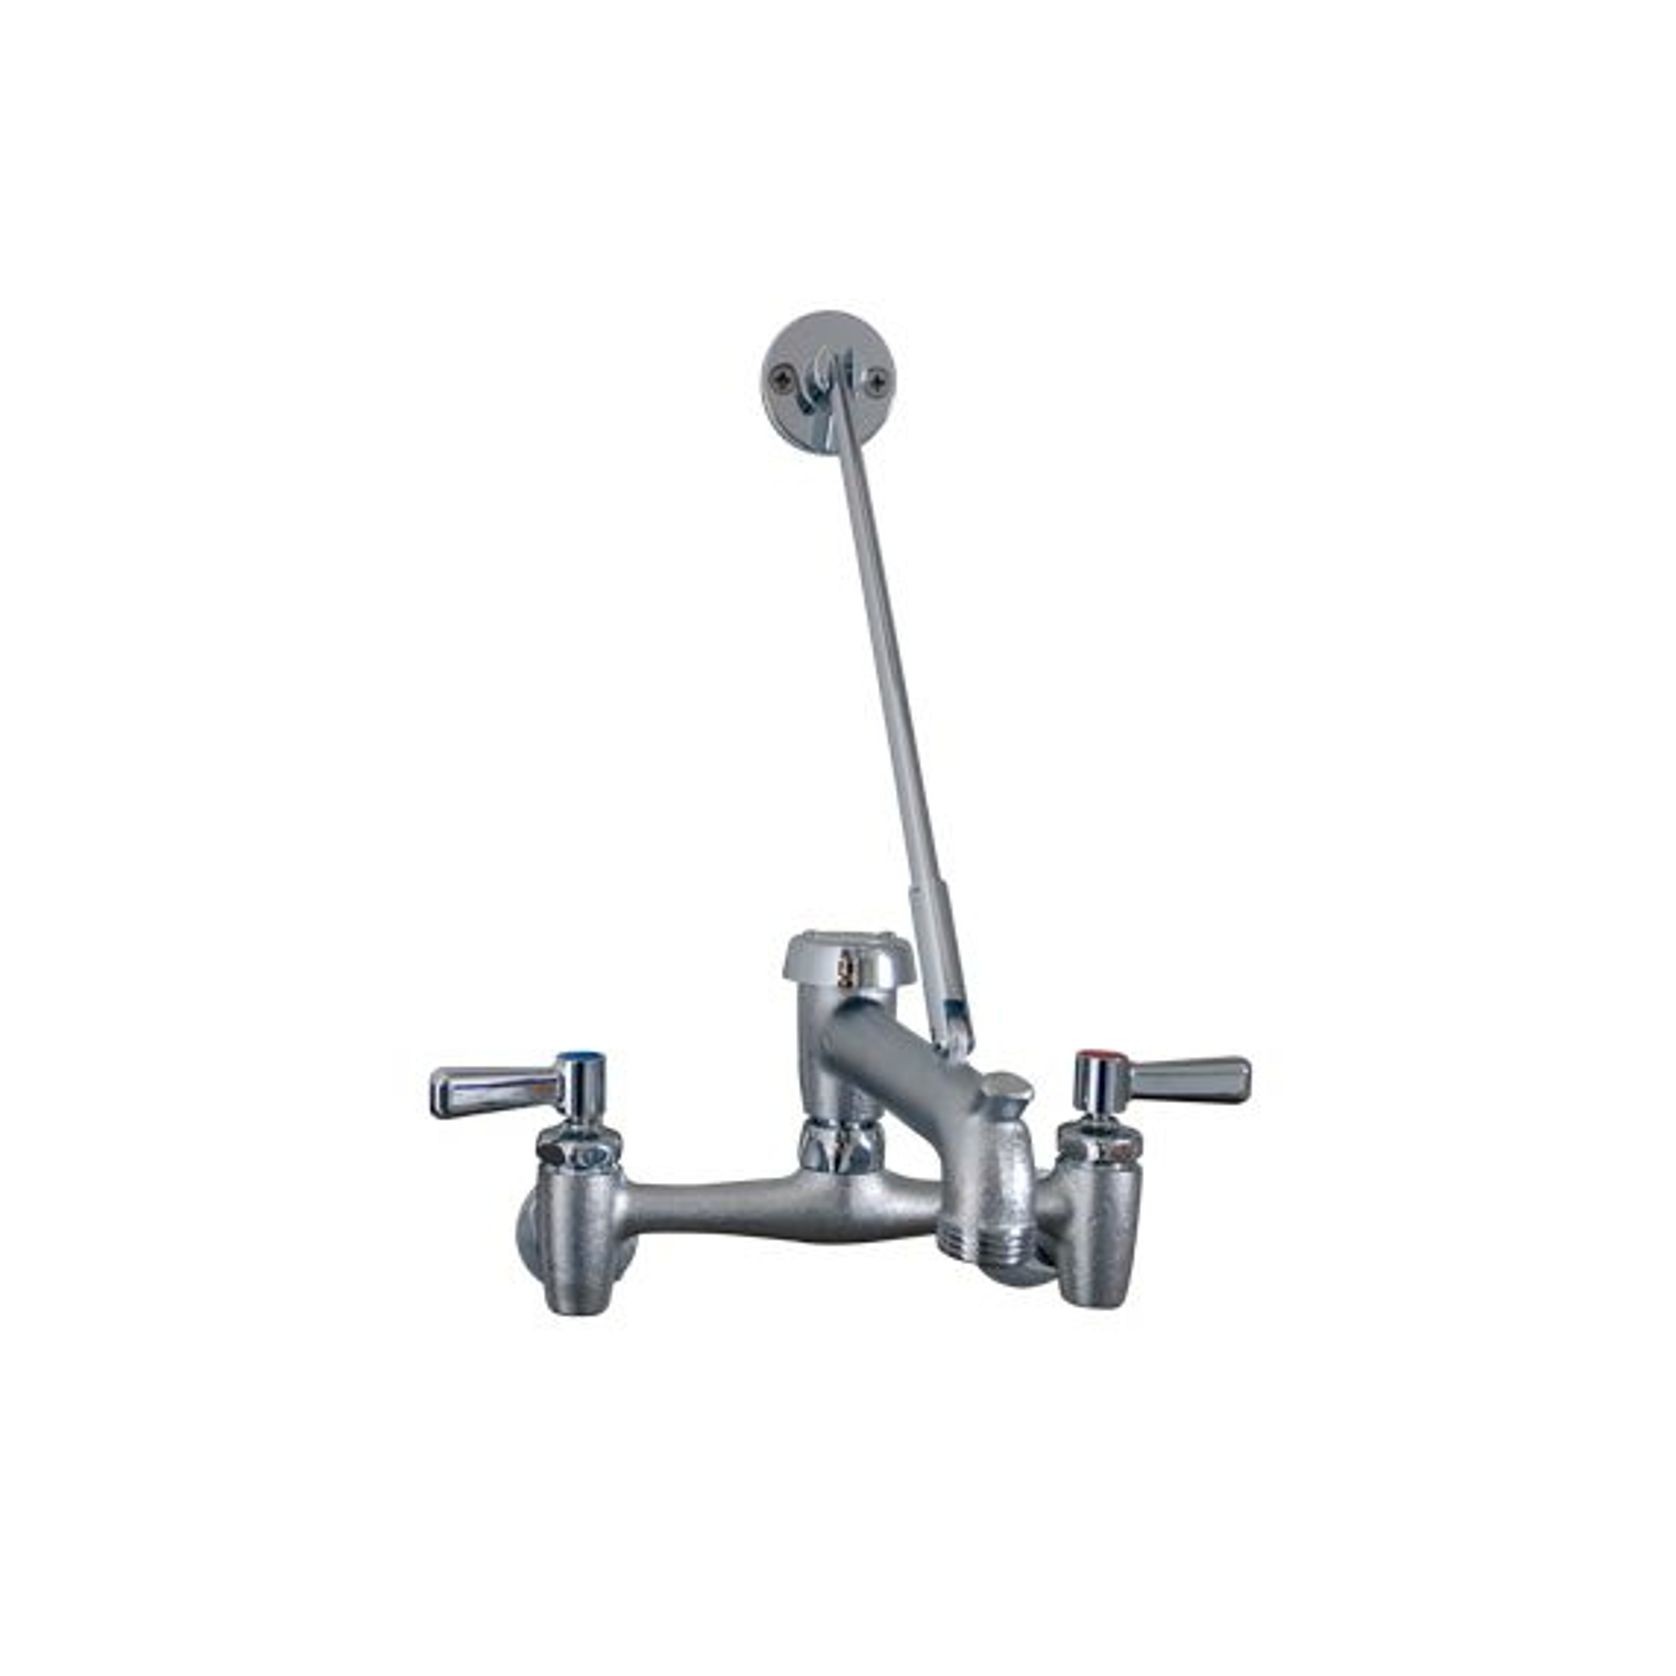 Zurn Sink Faucet For Cleaners Sink gallery detail image